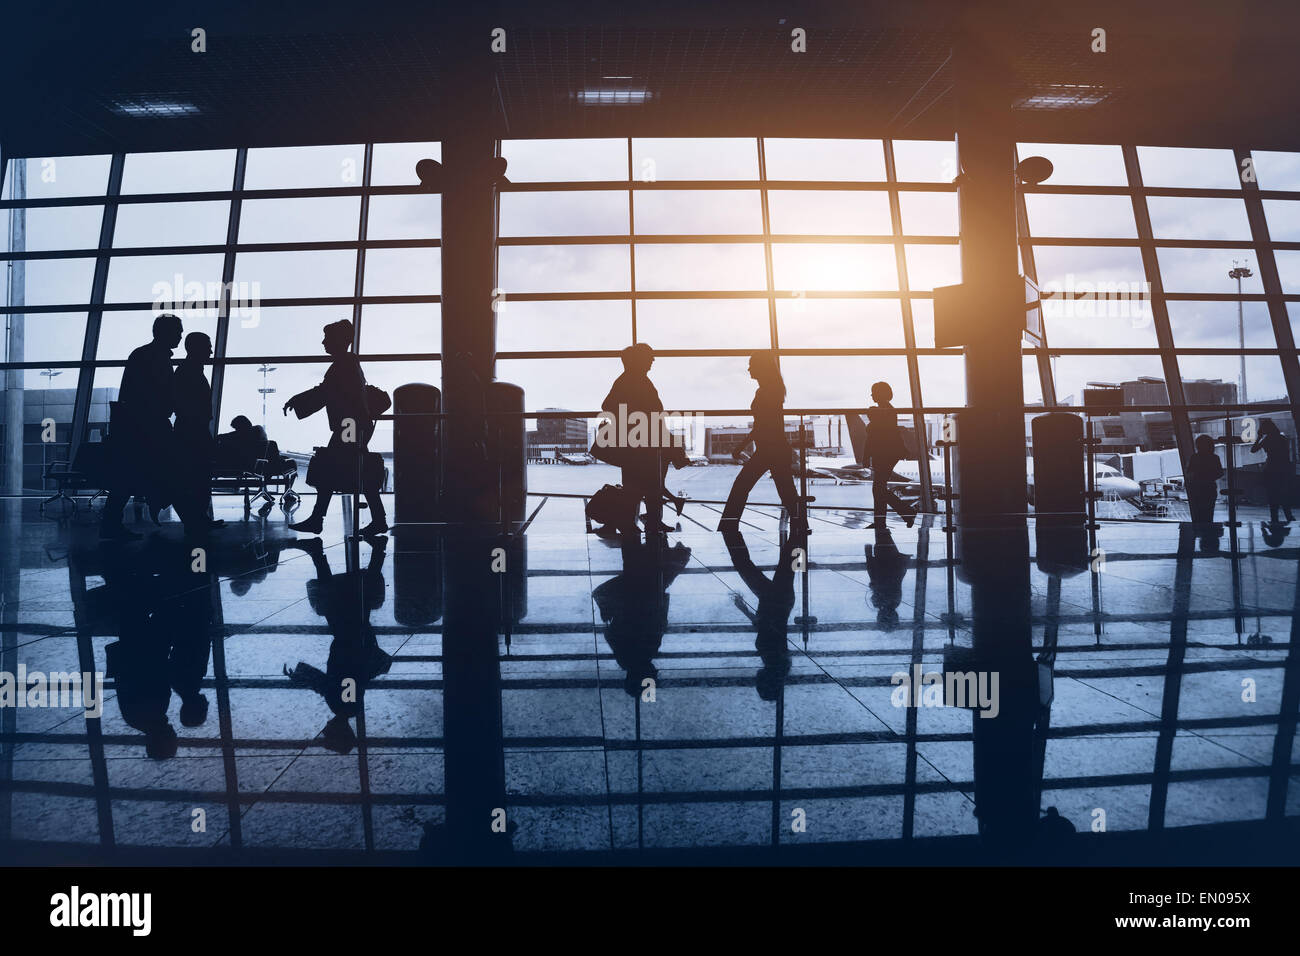 Silhouettes of commuters walking at airport Stock Photo